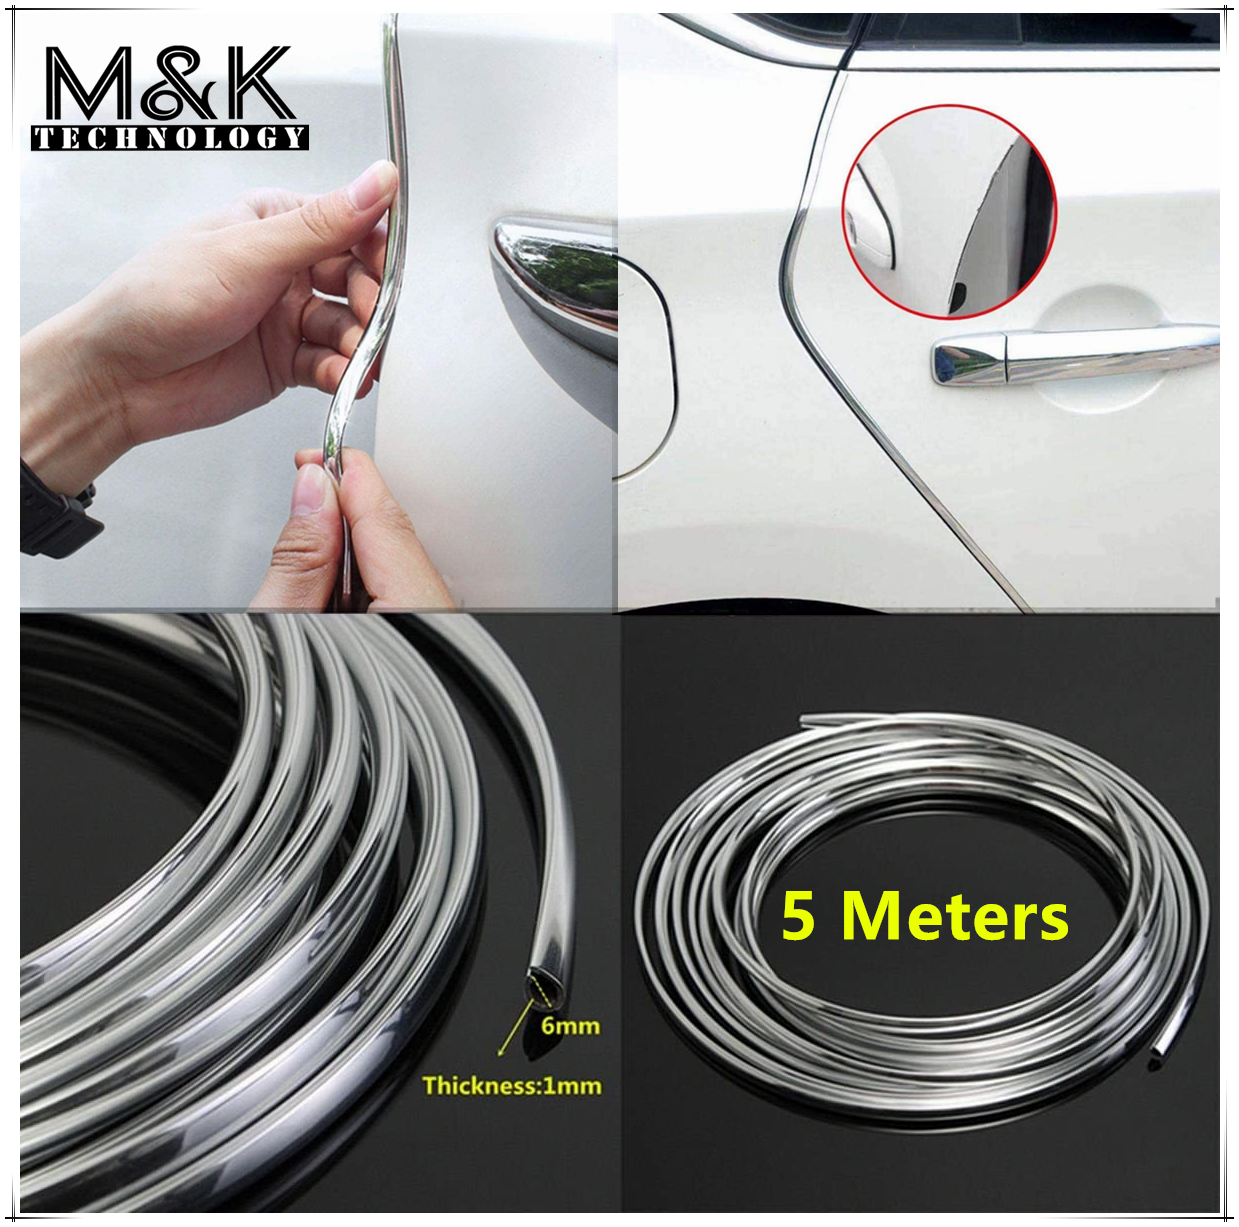 Original Car Door Edge Guards16FT(5M) Clear U Shape Trim Molding  Electroplated Glossy Rubber Seal Protector with Fits Most Cars(electroplated  Silver) 5M Silver Moulding Trim Rubber Strip Car Door Protector 5meters